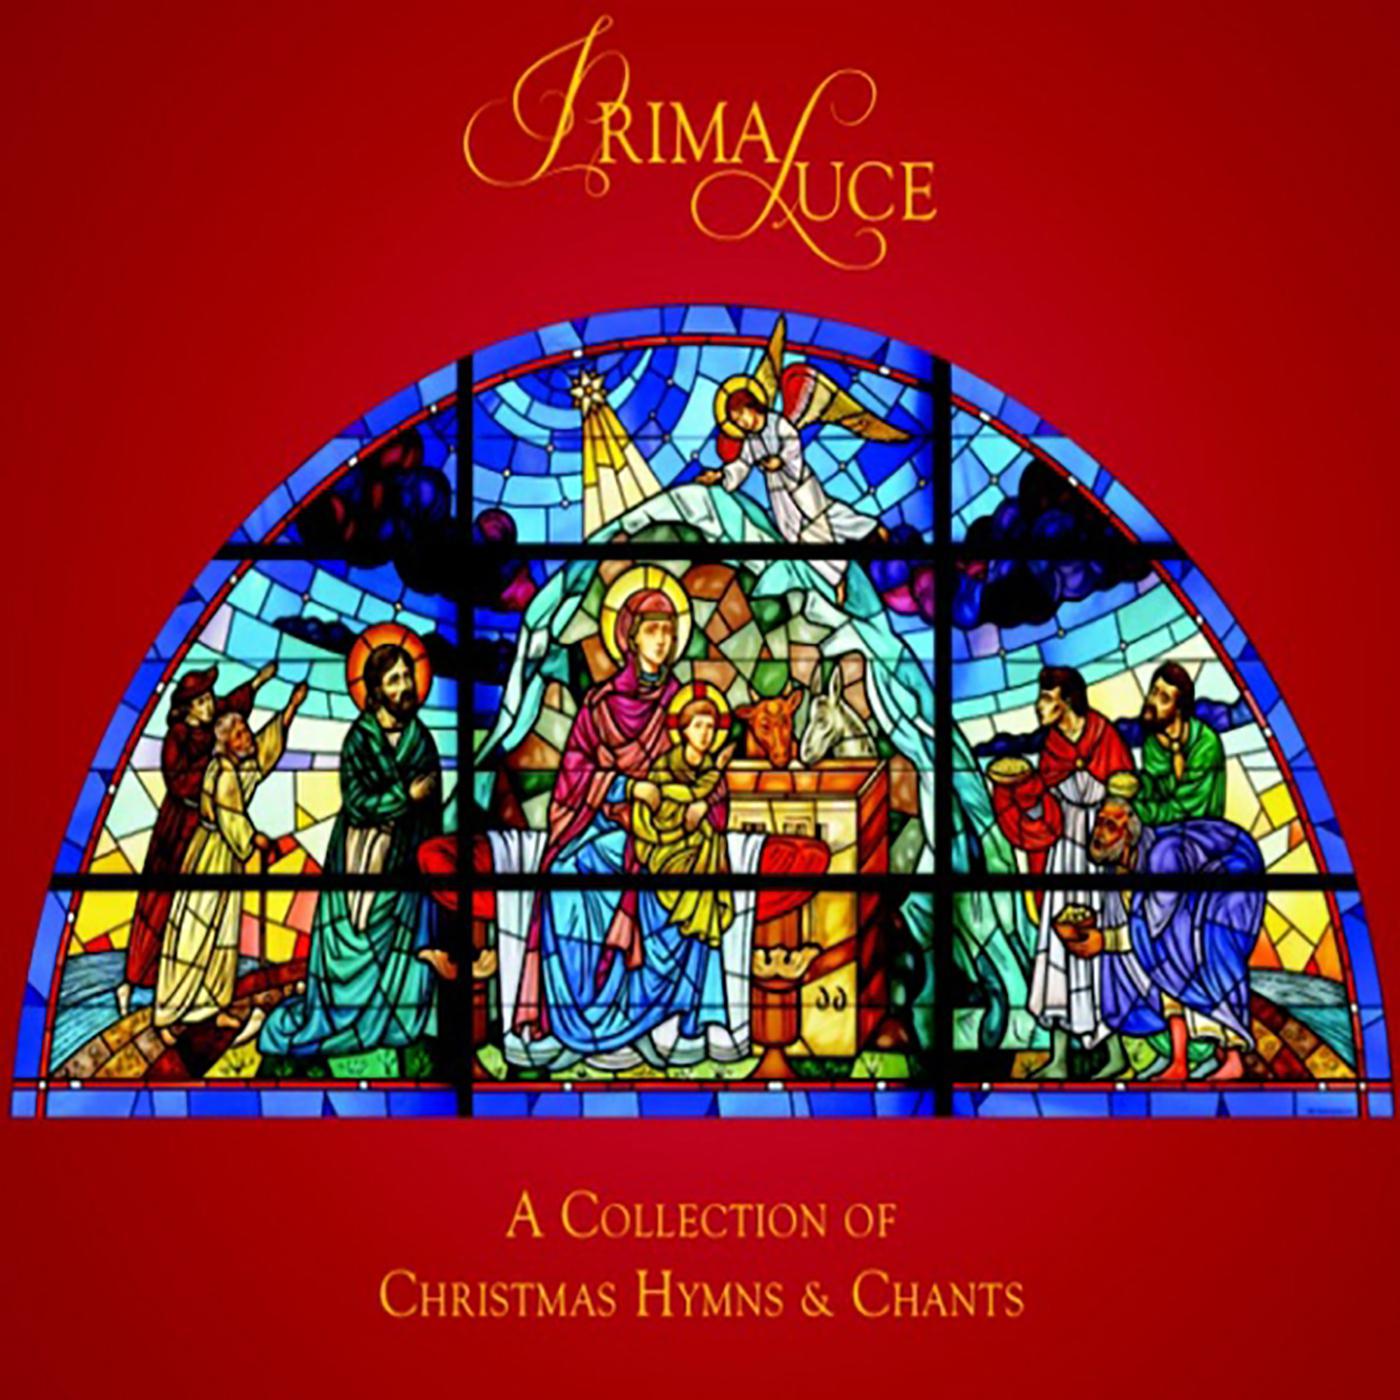 A Collection of Christmas Hymns & Chants